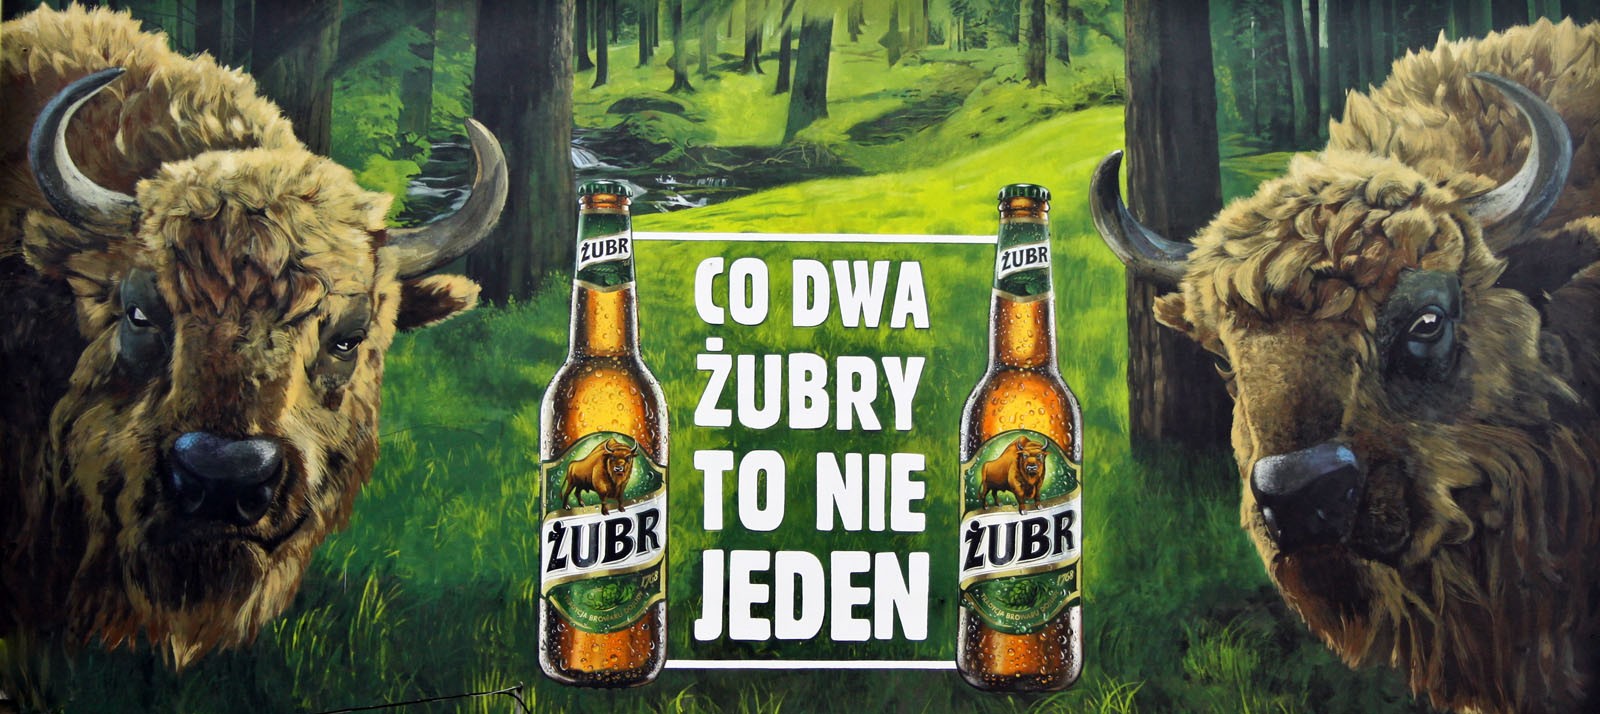 Every two Zubr are better than one beer advertisement painted on the wall | Every two Zubr are better than one | Portfolio